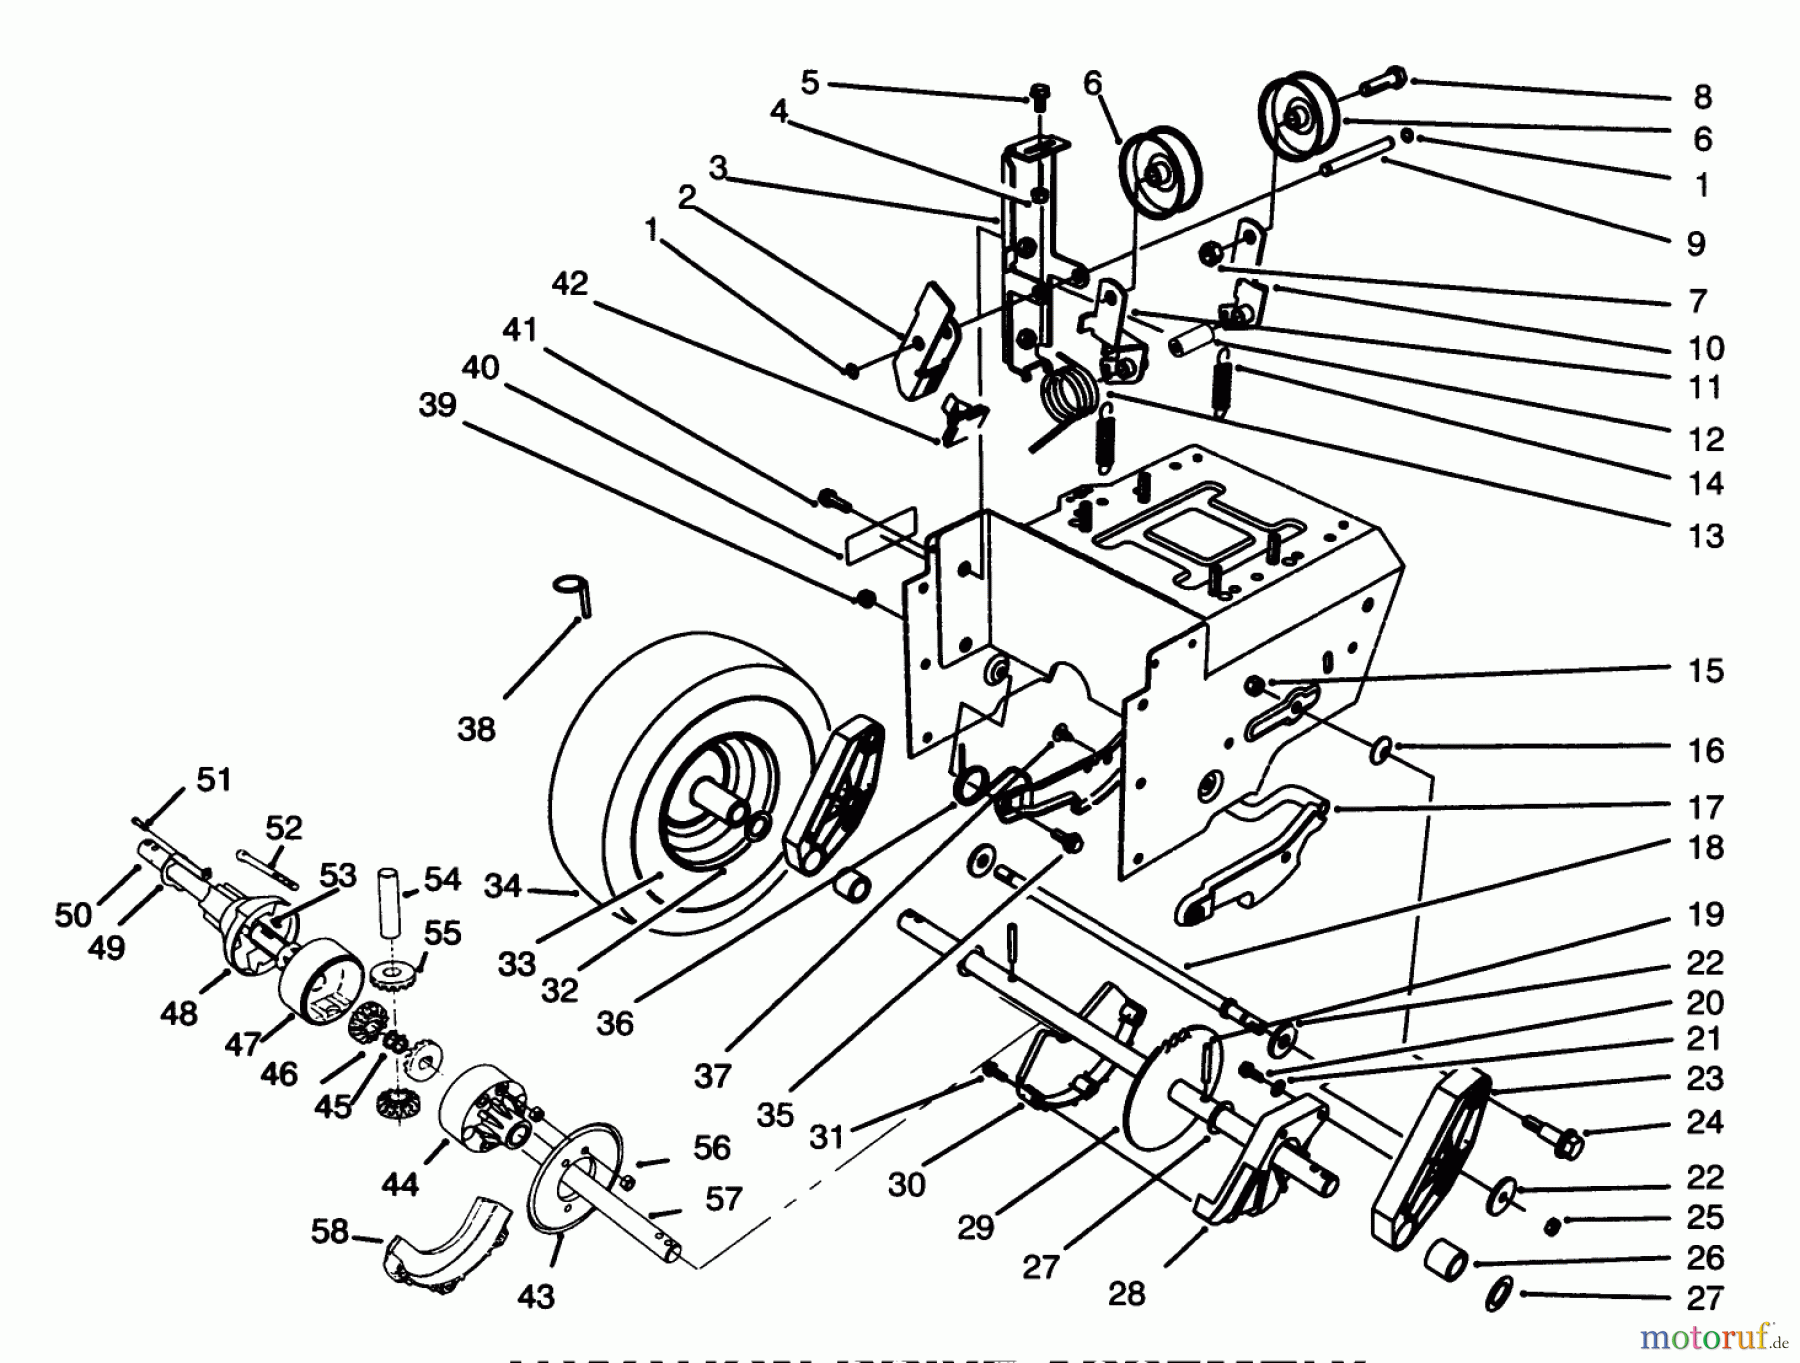  Toro Neu Snow Blowers/Snow Throwers Seite 1 38591 (1232) - Toro 1232 Power Shift Snowthrower, 1996 (6900001-6999999) TRACTION DRIVE ASSEMBLY